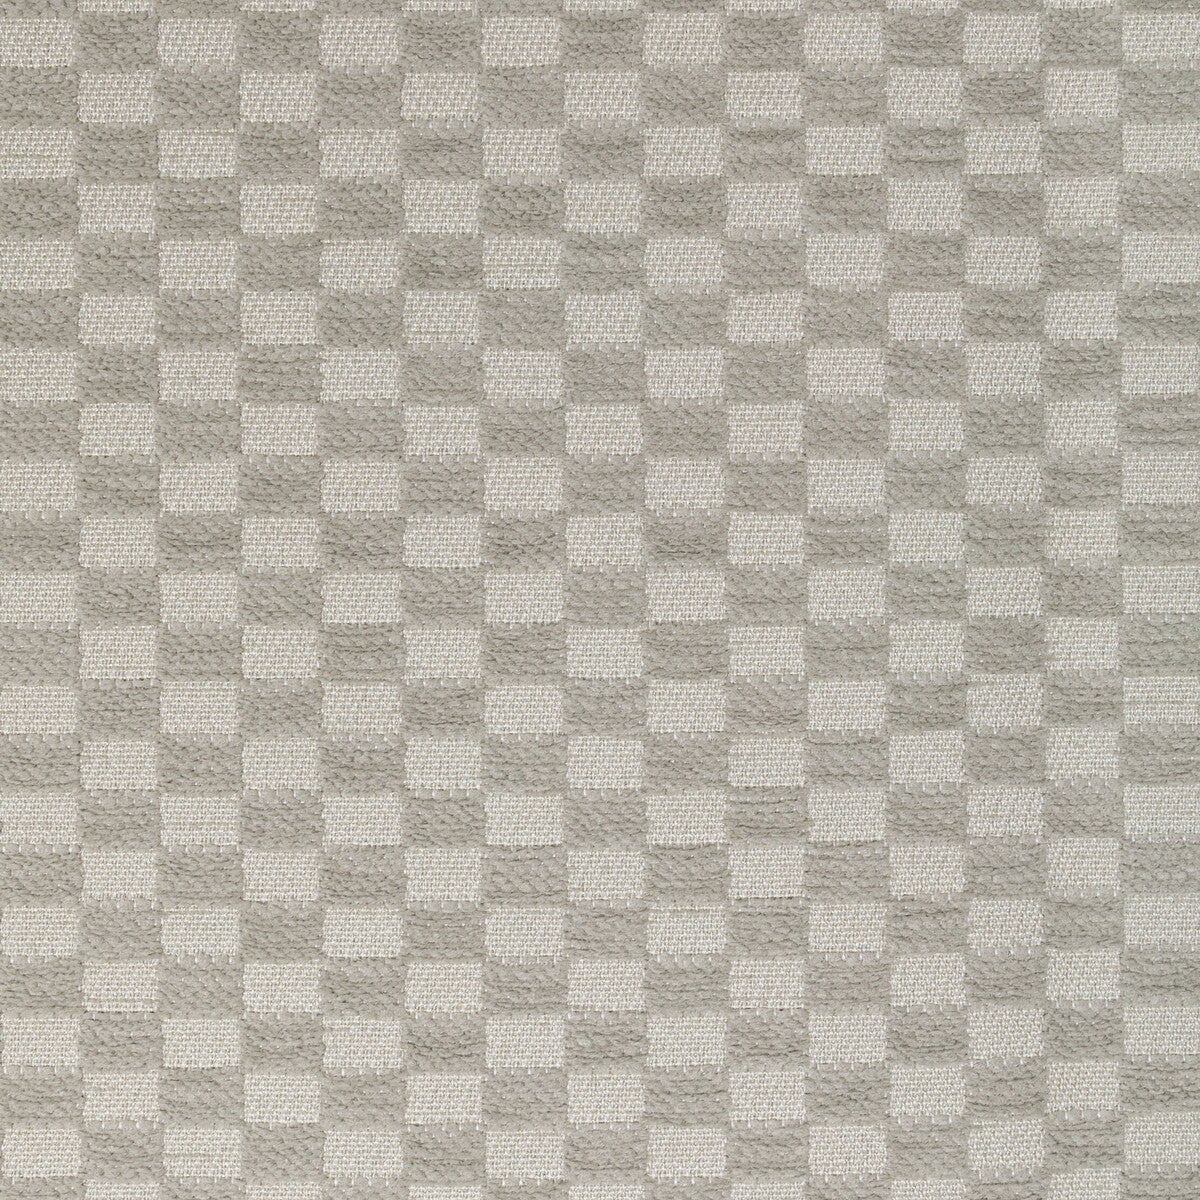 Reform fabric in sand dollar color - pattern 36567.106.0 - by Kravet Contract in the Seaqual collection